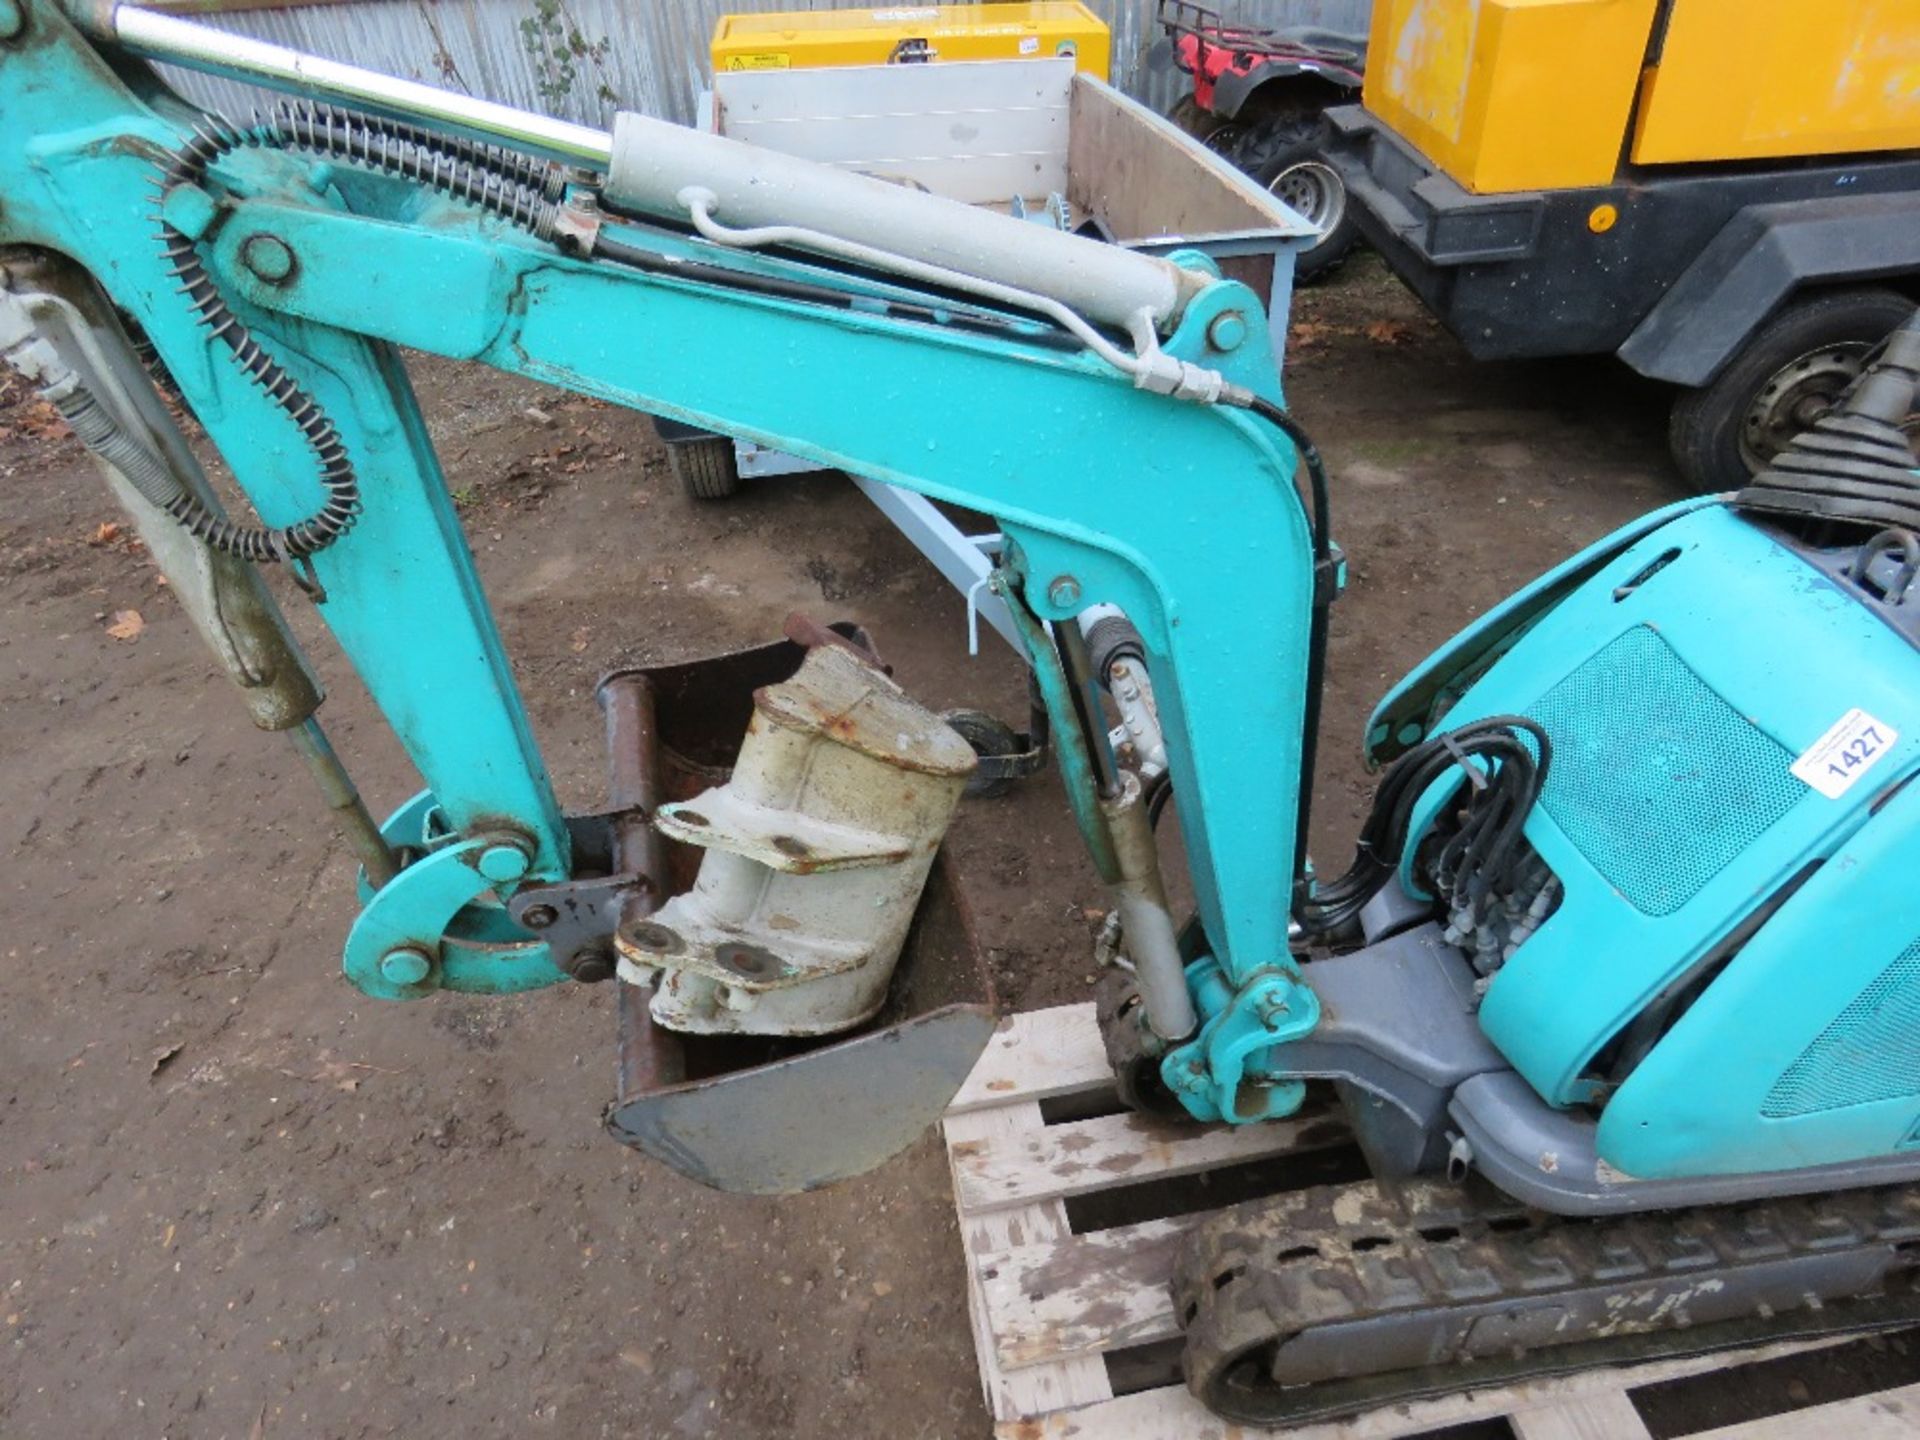 KOBELCO 22 MICRO EXCAVATOR WITH 2 X BUCKETS. PETROL ENGINED, 1049 REC HOURS. SN:FS-01494. THIS LOT I - Image 8 of 8